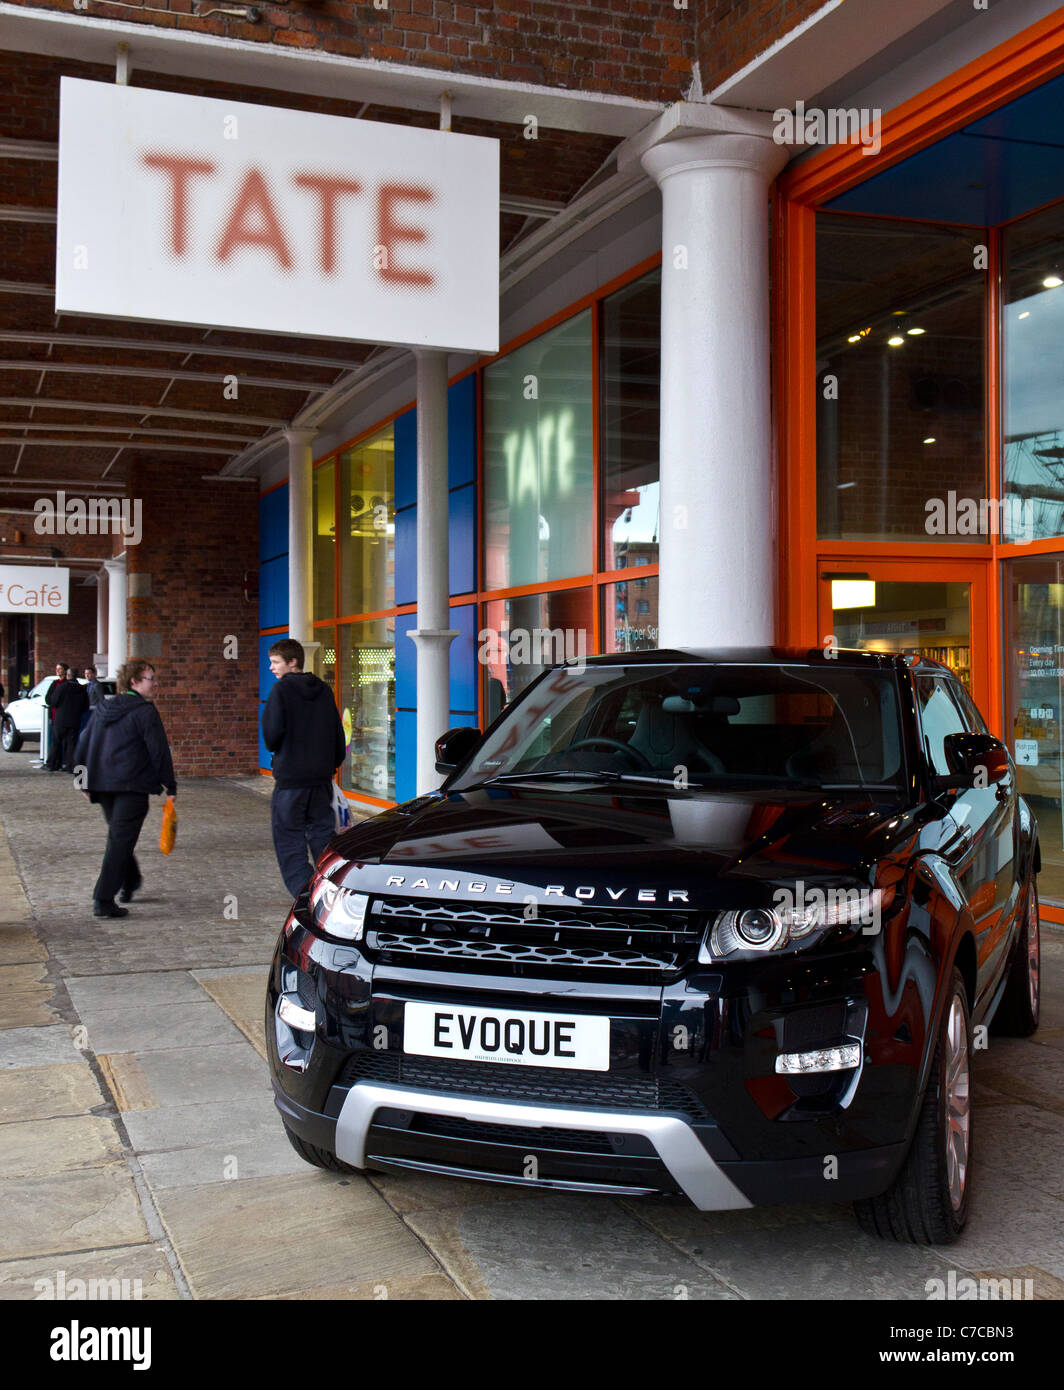 The new Range Rover Evoque, on display at the Tate Gallery, Liverpool Stock Photo